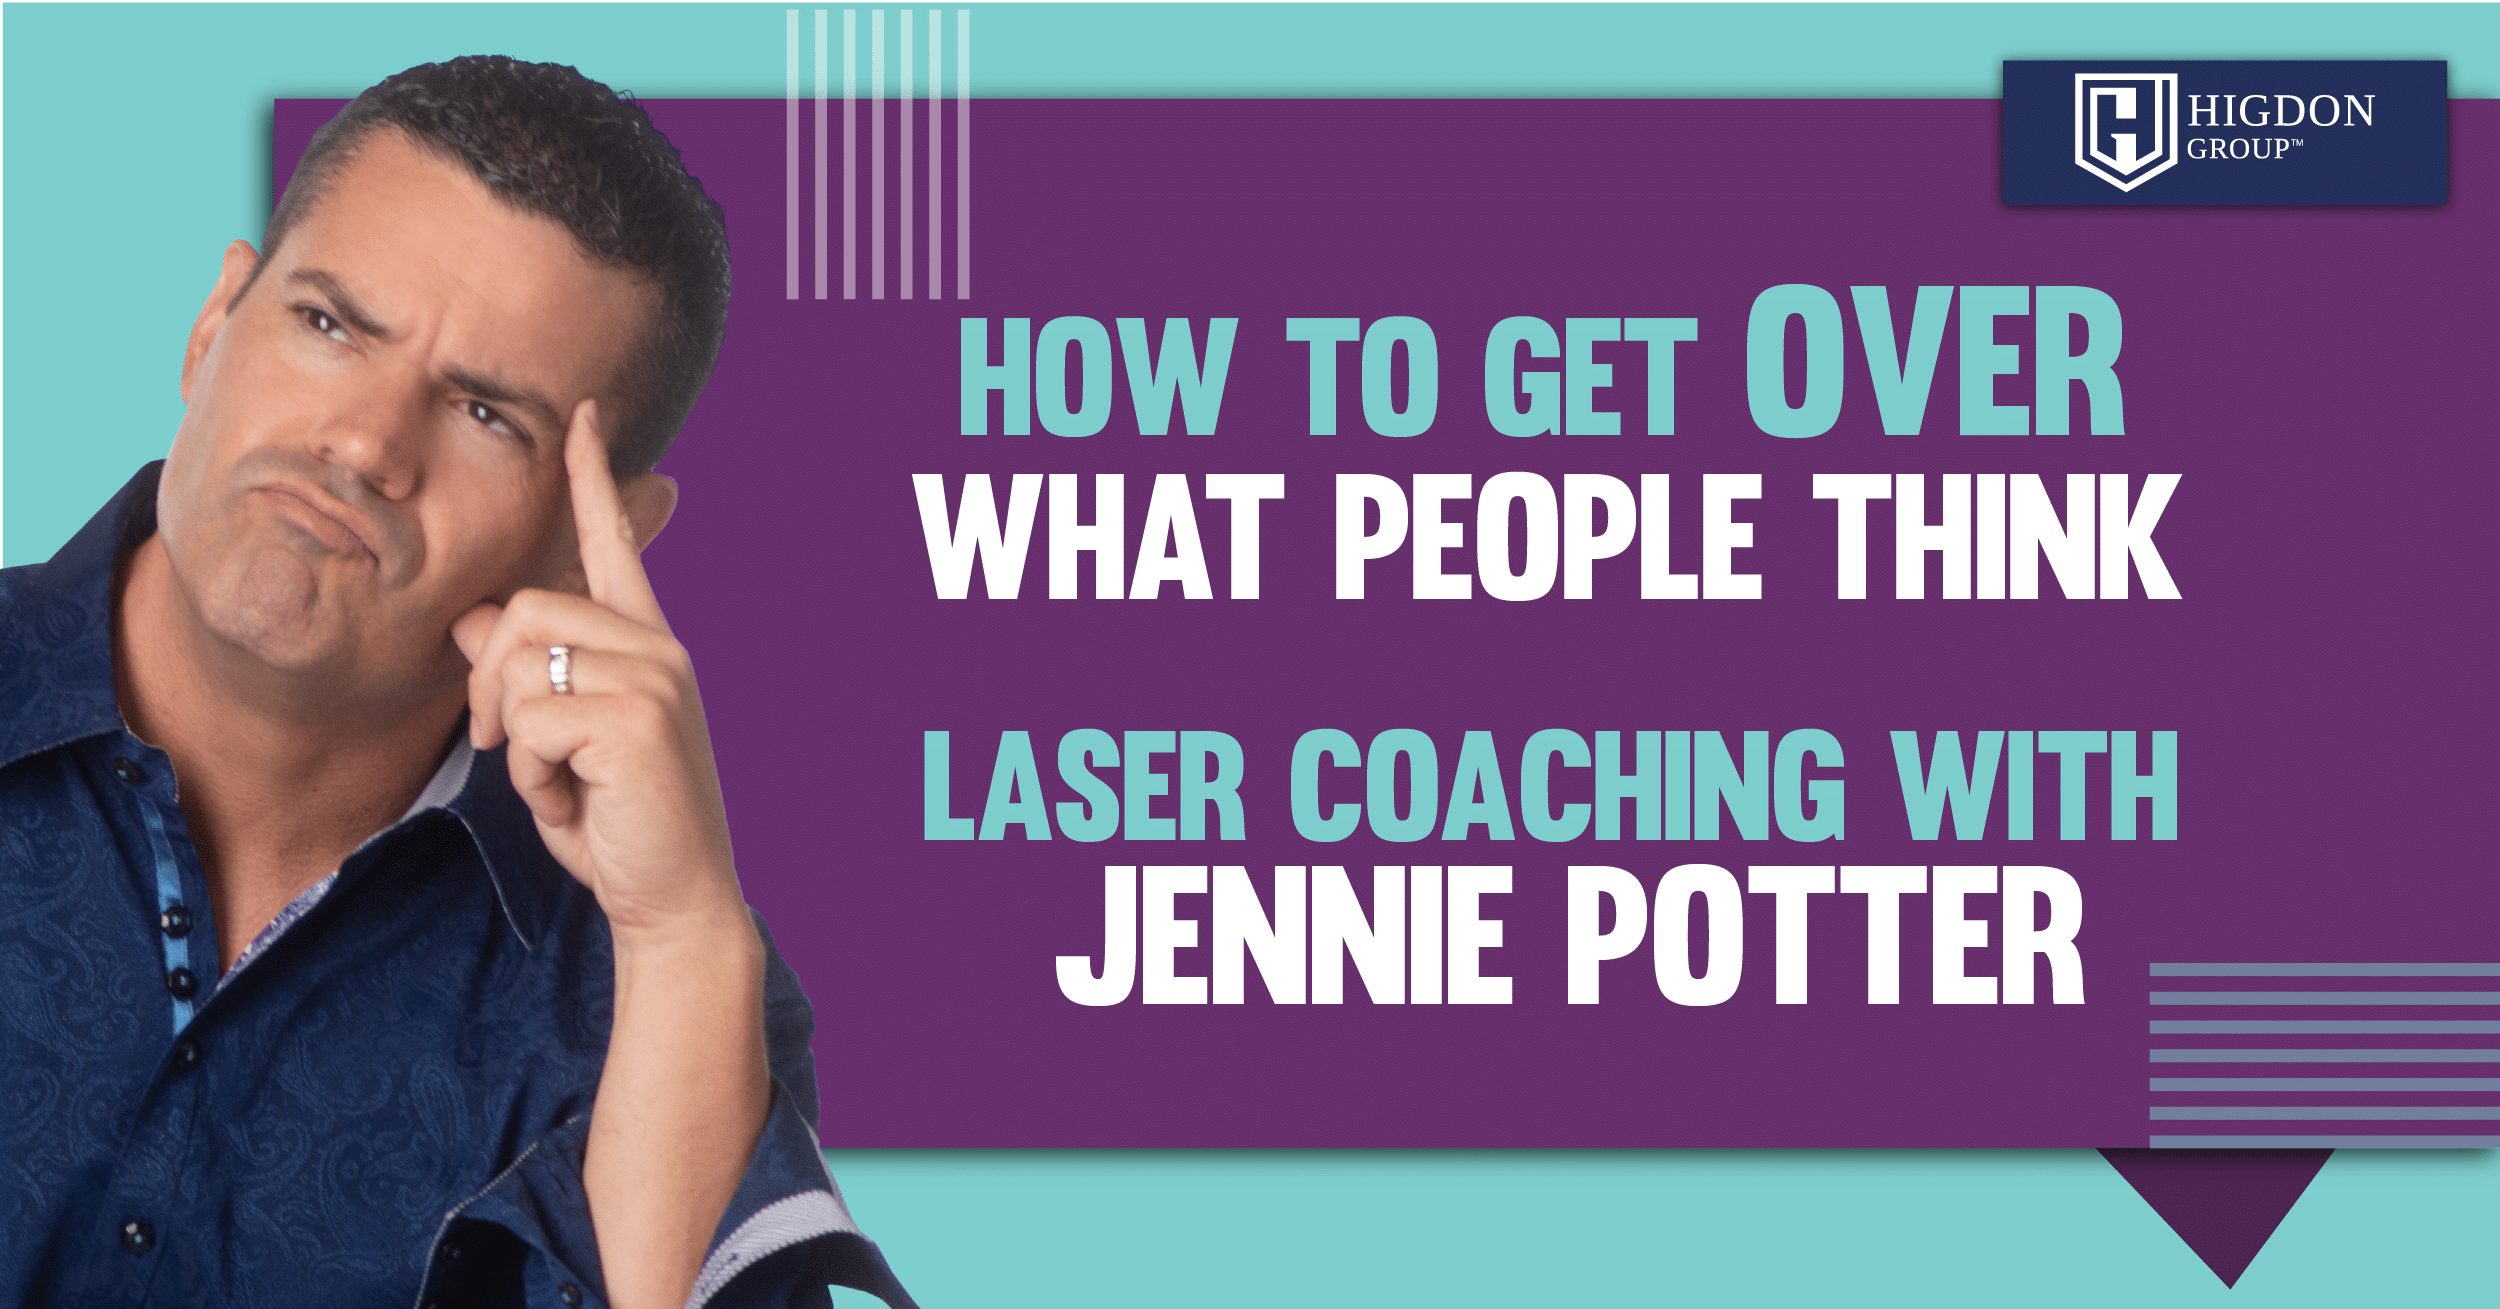 How To Get Over What People Think (Laser Coaching With Jennie Potter)